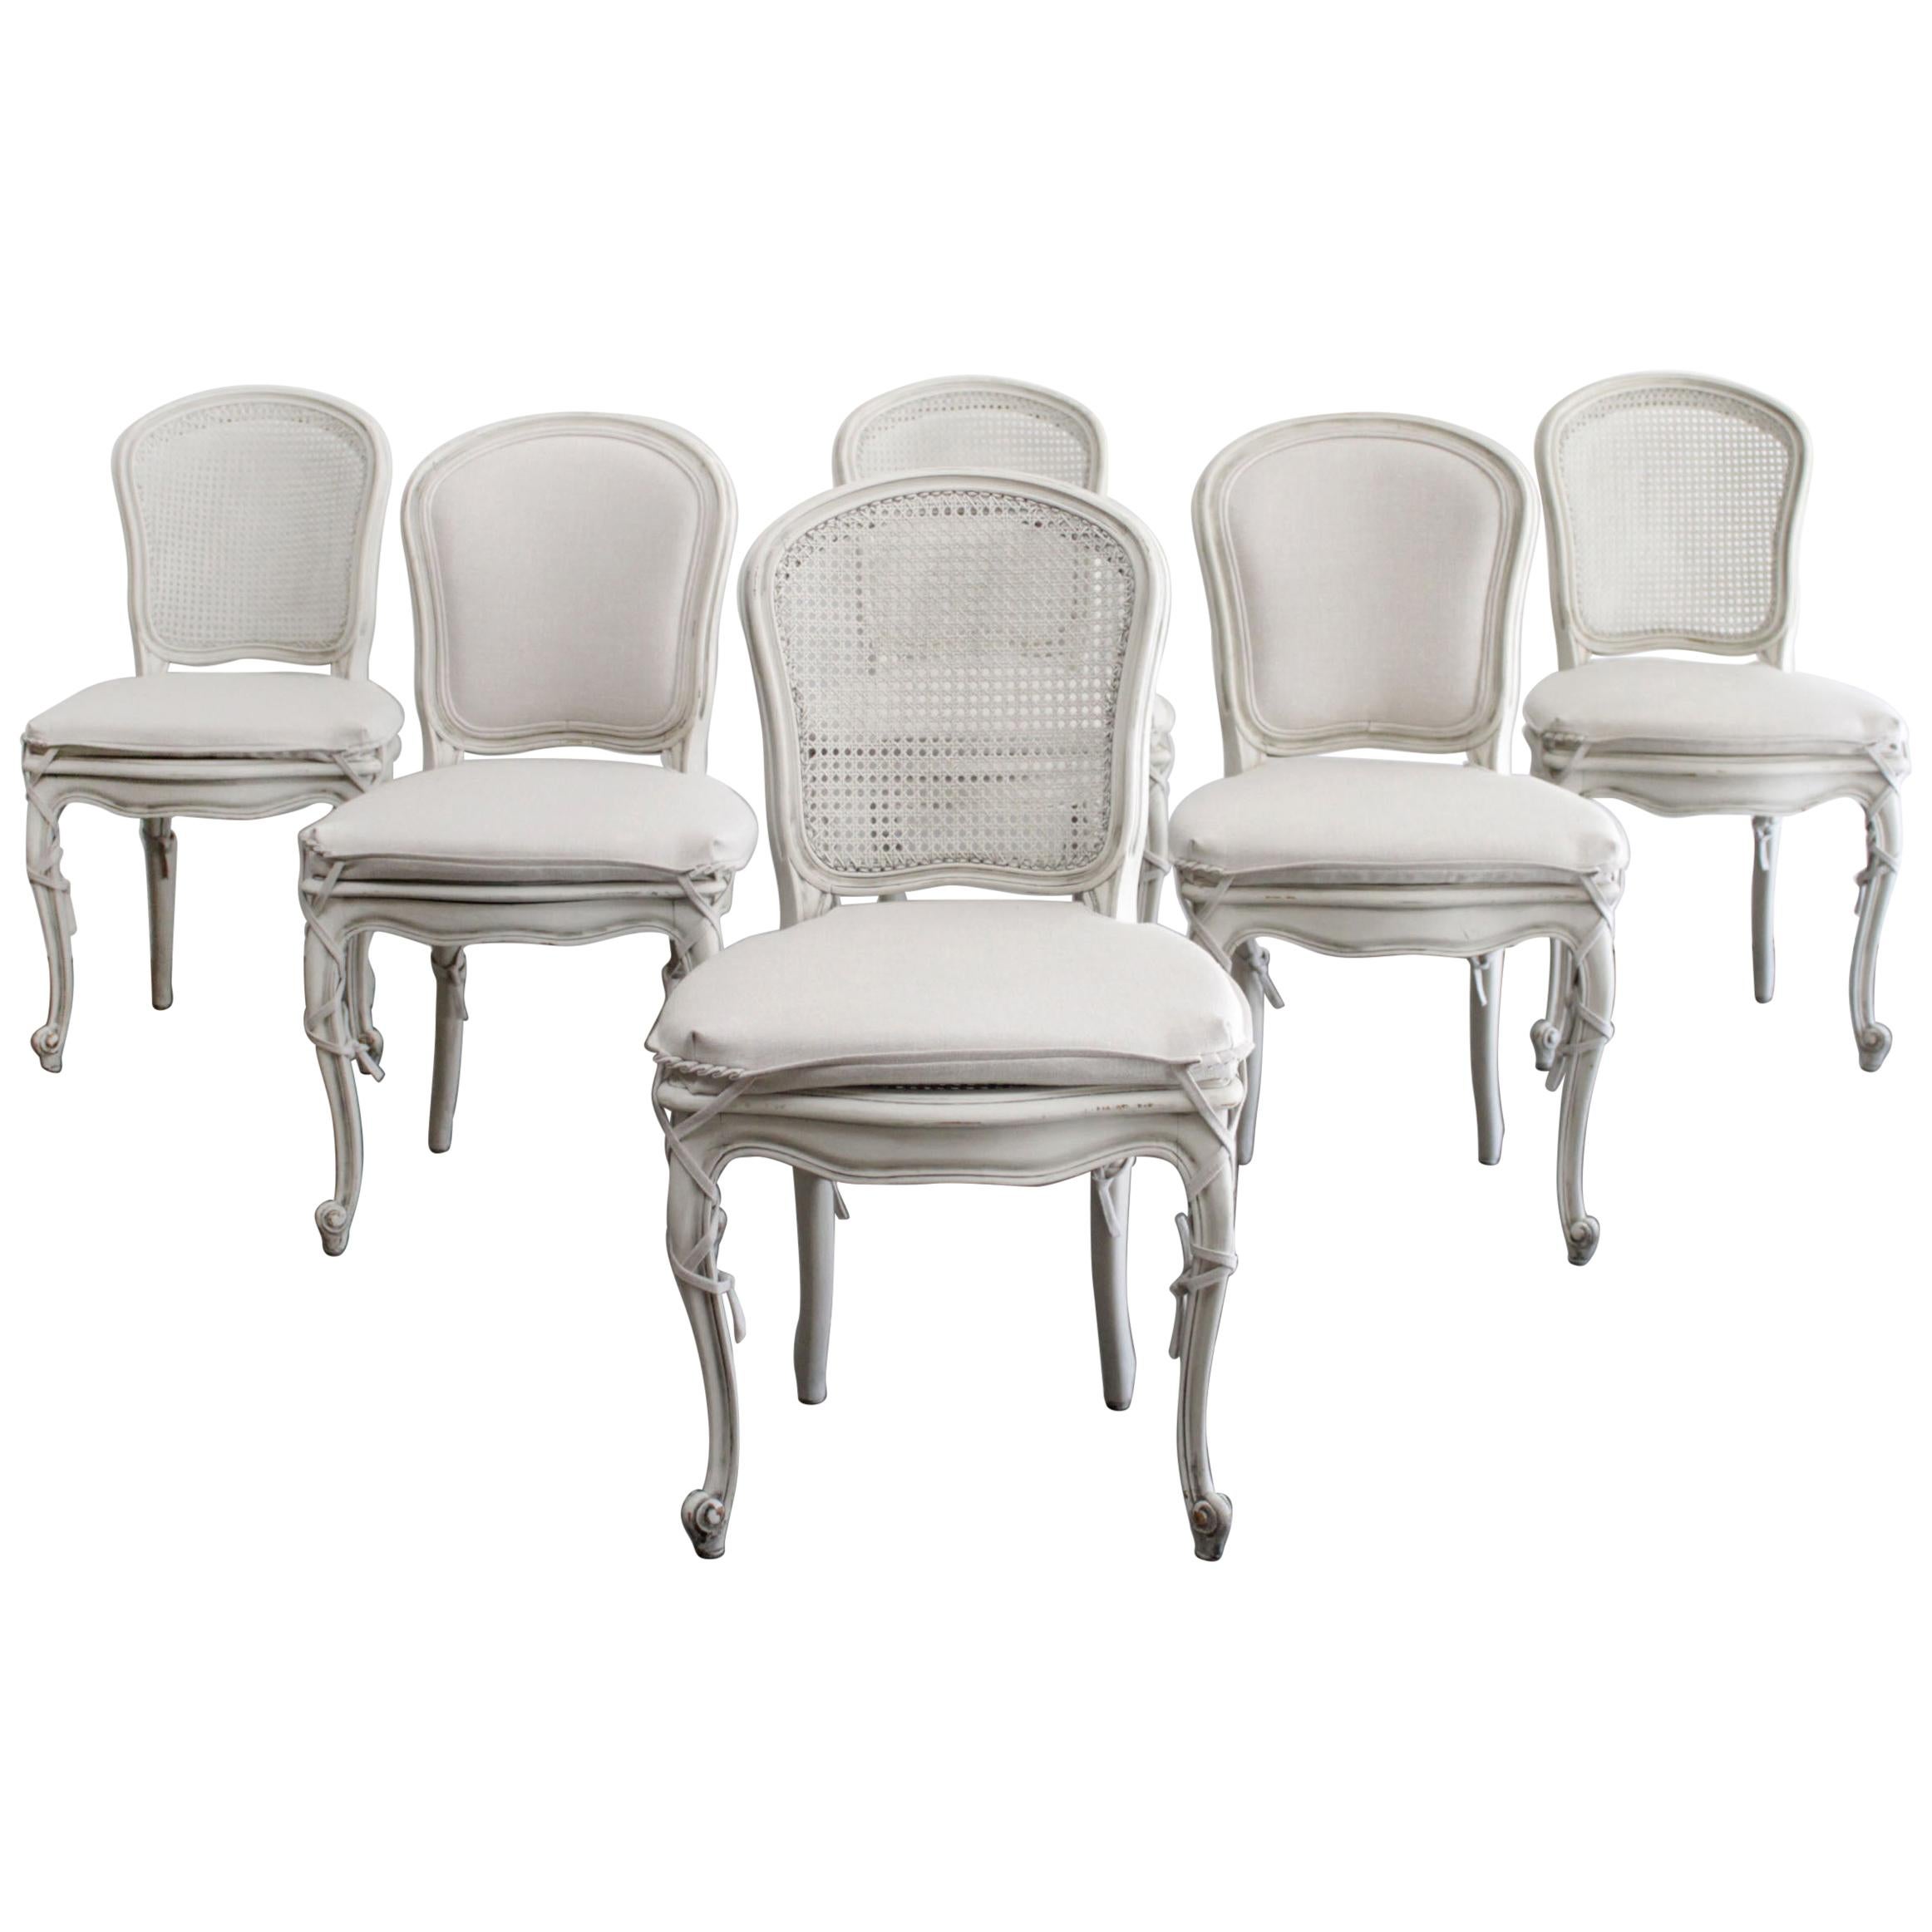 Set of 6 Painted and Upholstered Cane Back Dining Chairs with Slip Covers